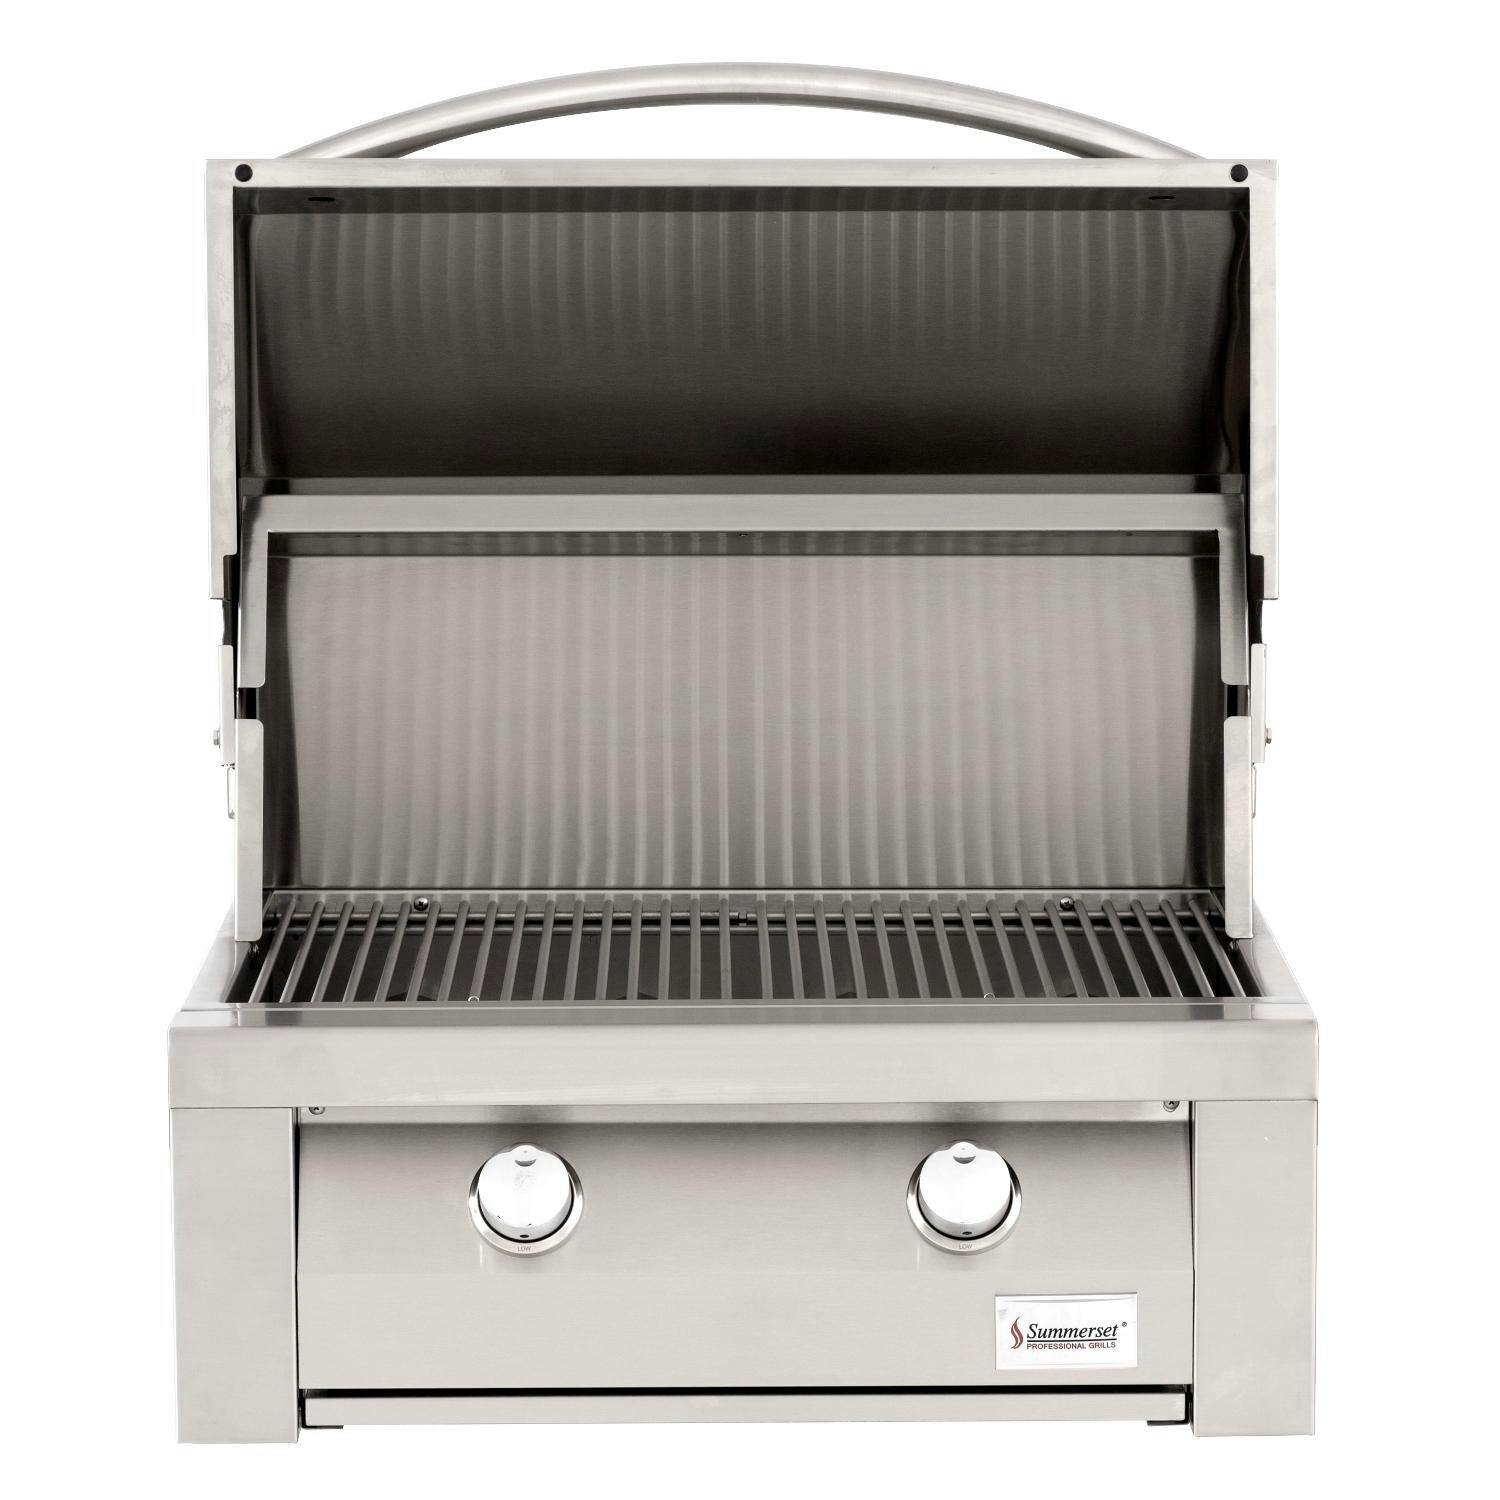 Summerset Builder Built-In Gas Grill · 30 in. · Natural